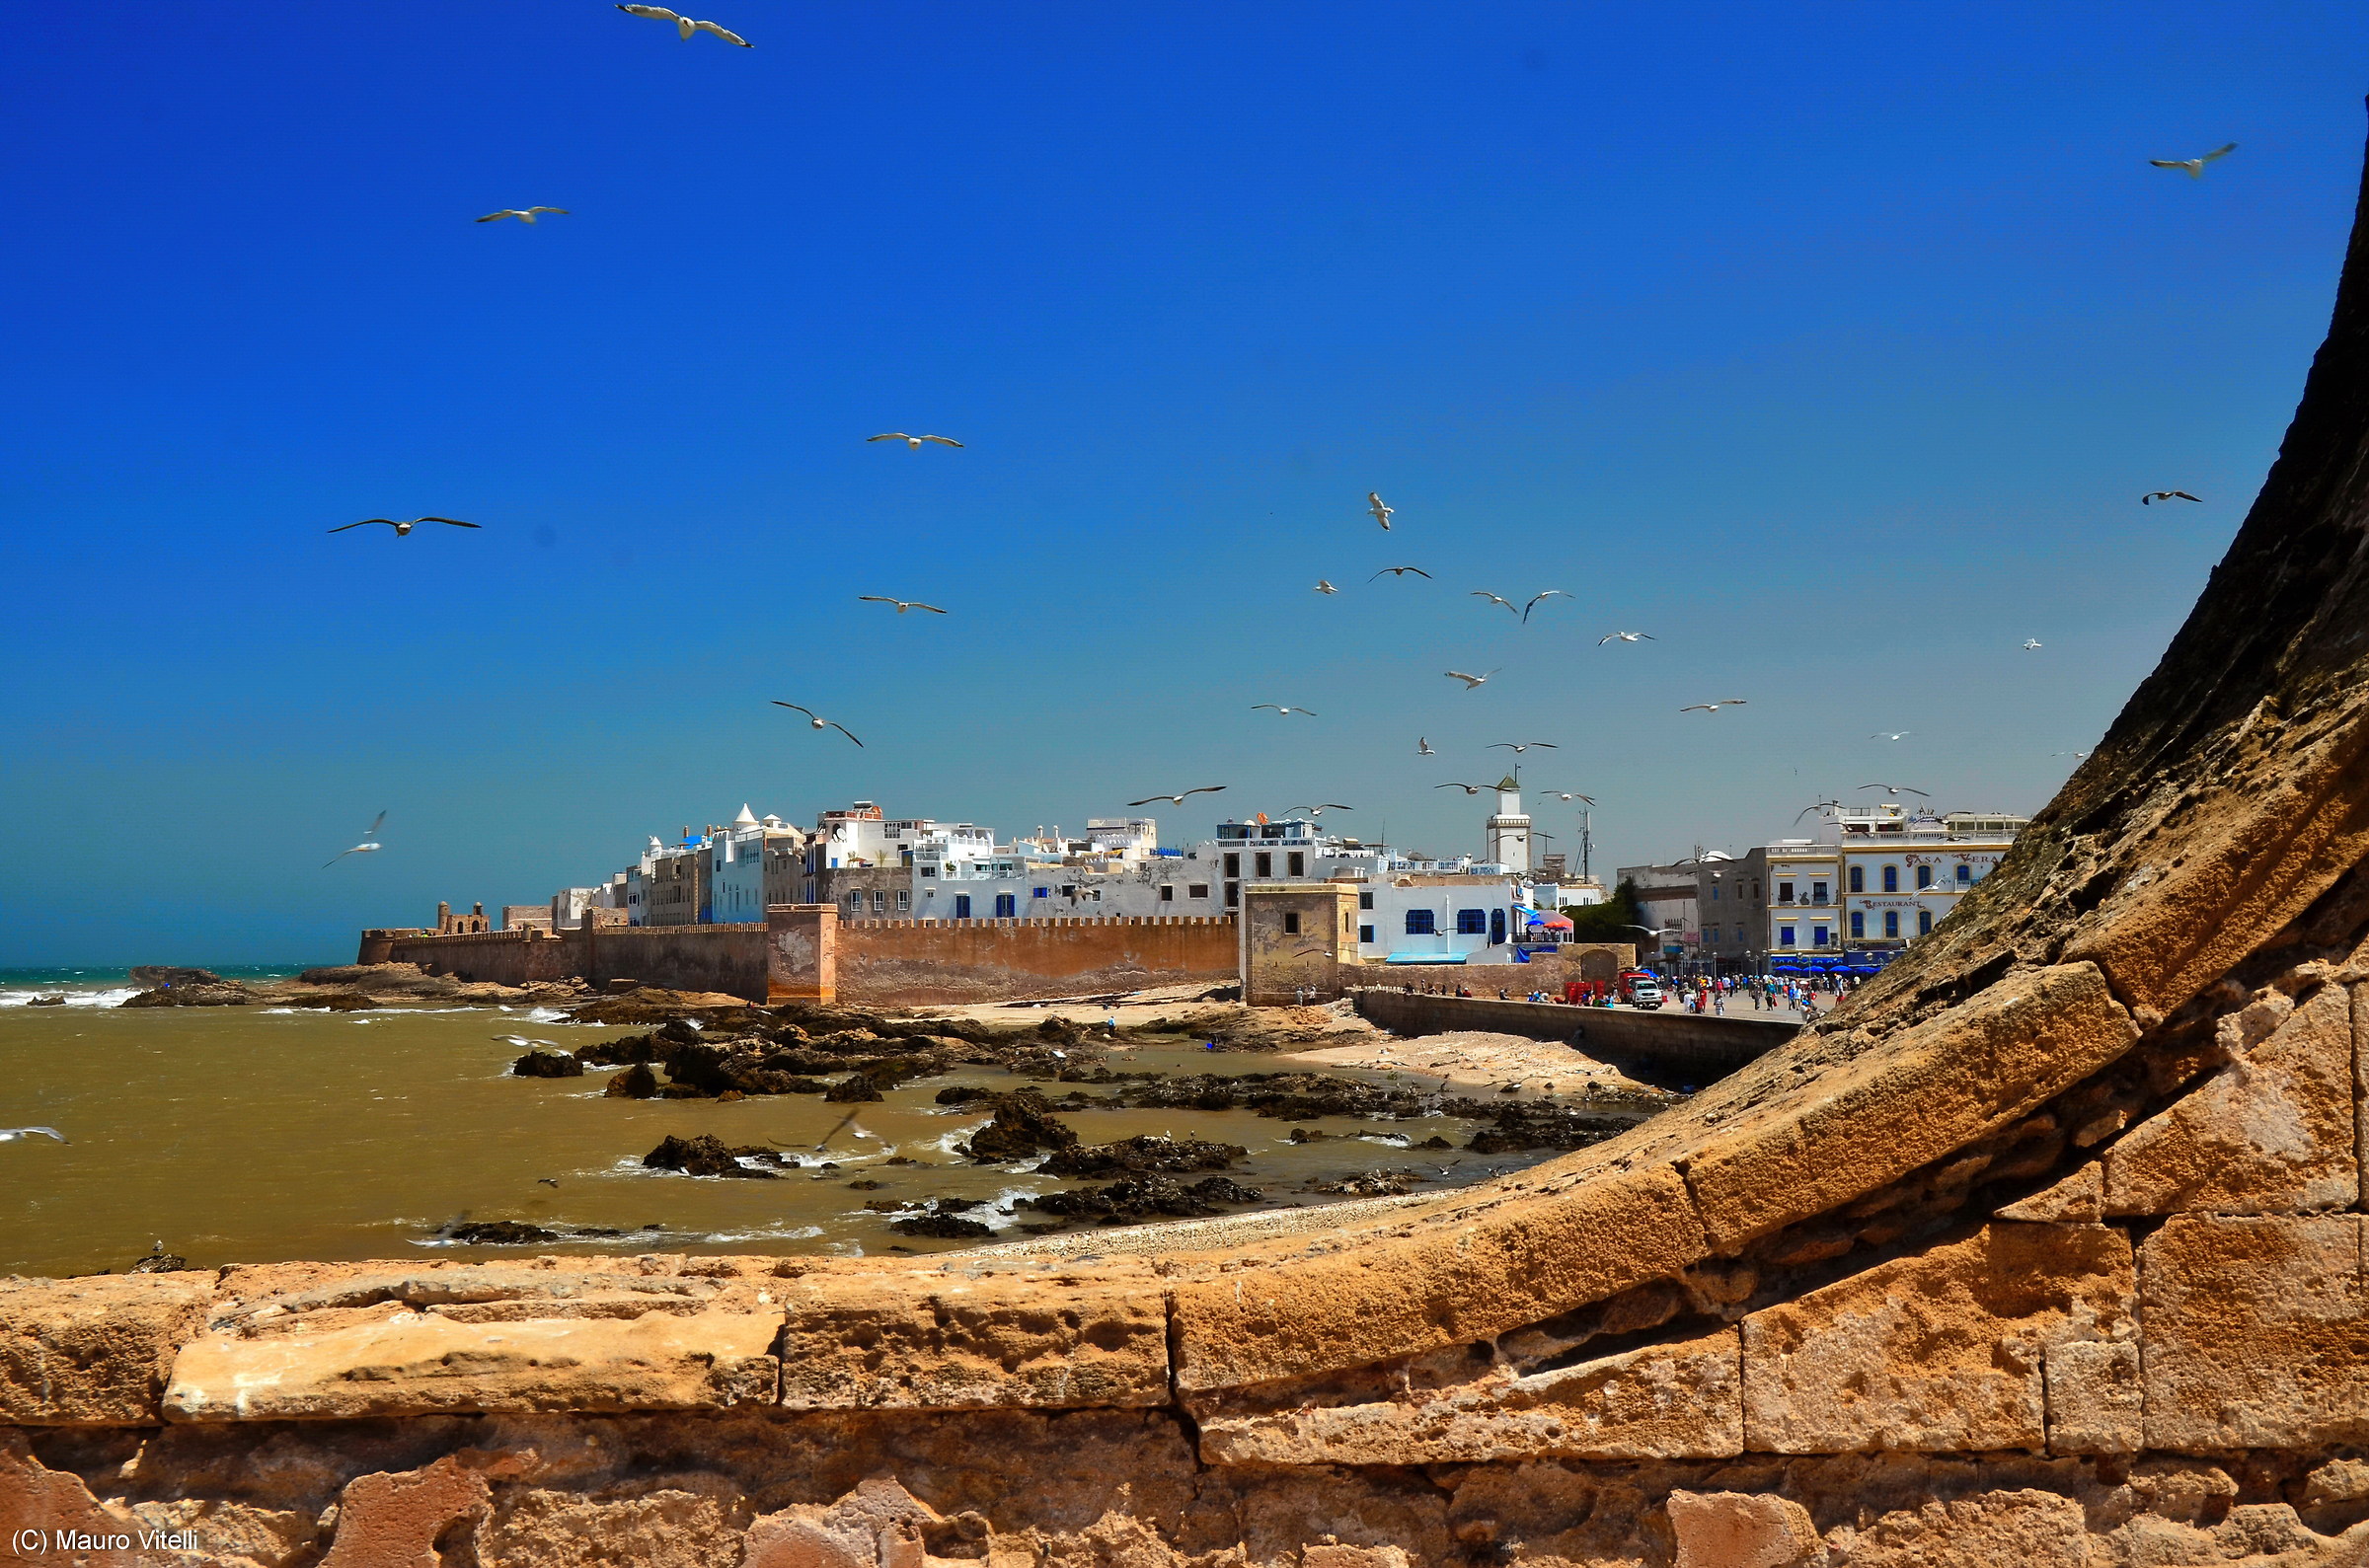 Essaouira (one glimpse of the town)...